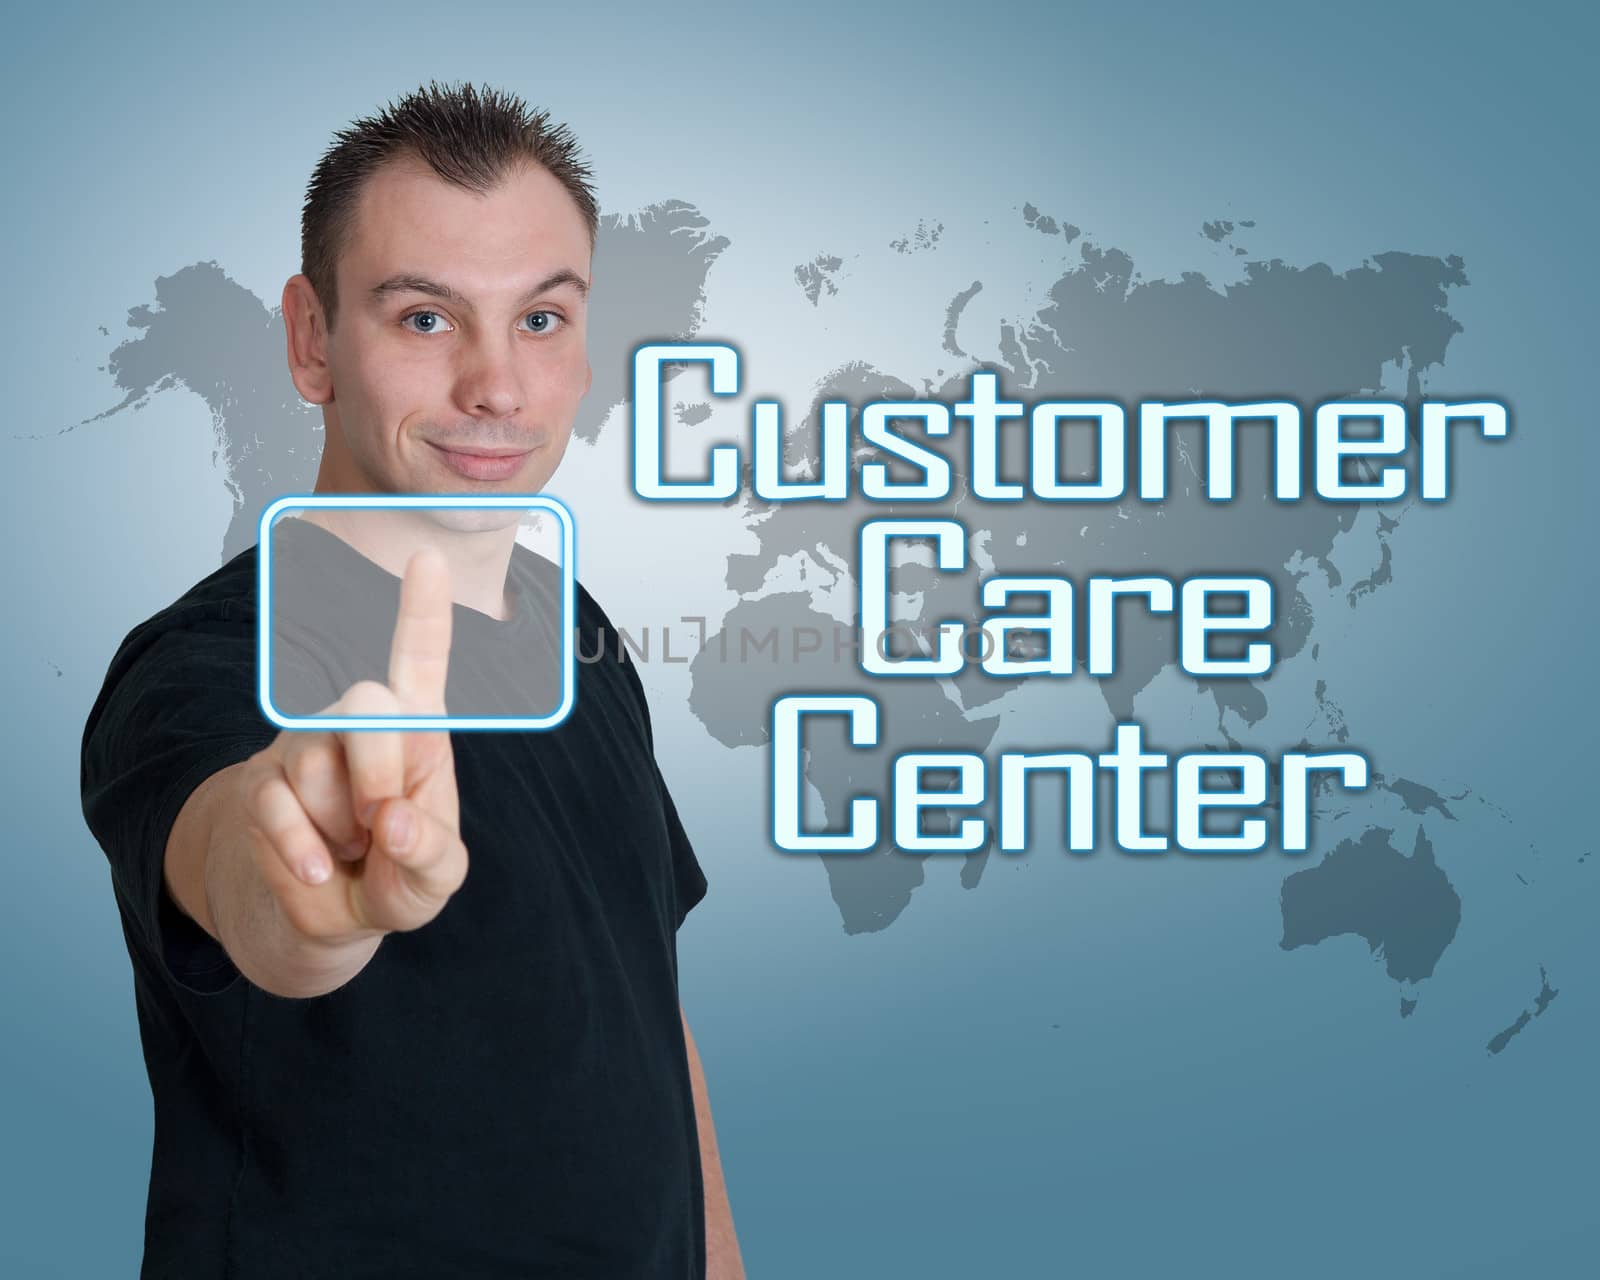 Young man press digital Customer Care Center button on interface in front of him